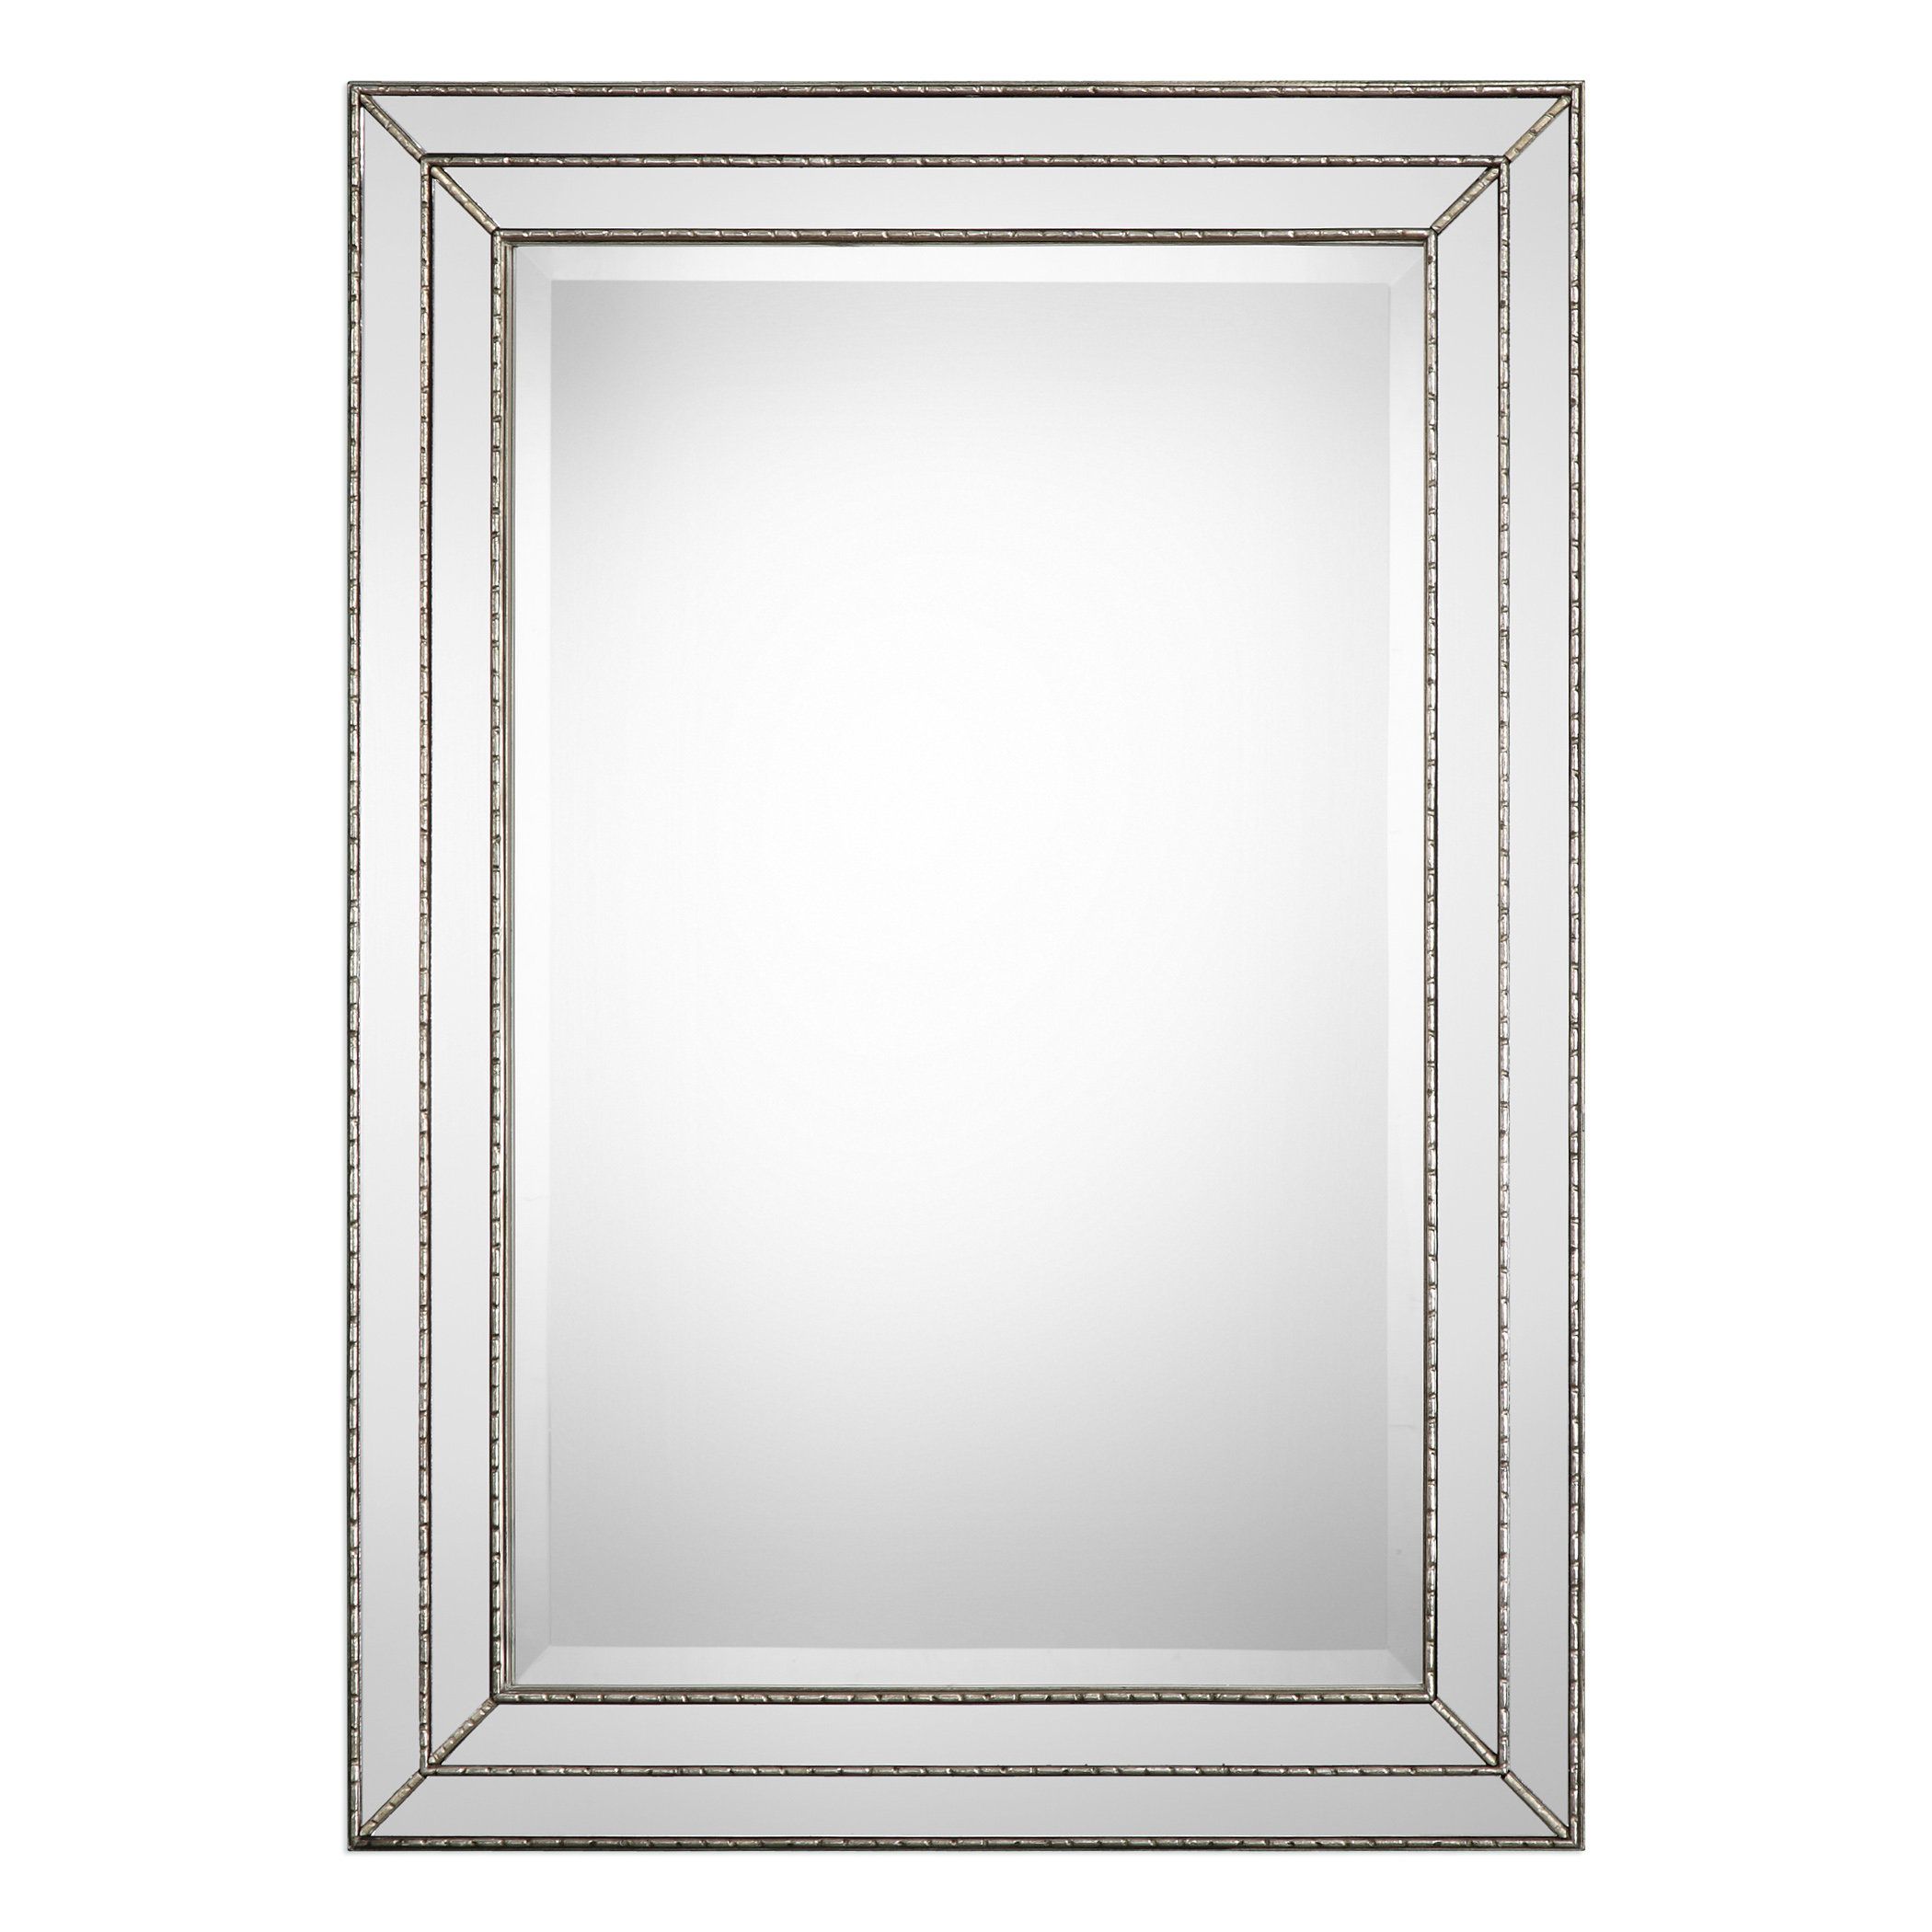 Greyleigh Willacoochee Traditional Beveled Accent Mirror Inside Alie Traditional Beveled Distressed Accent Mirrors (View 23 of 30)